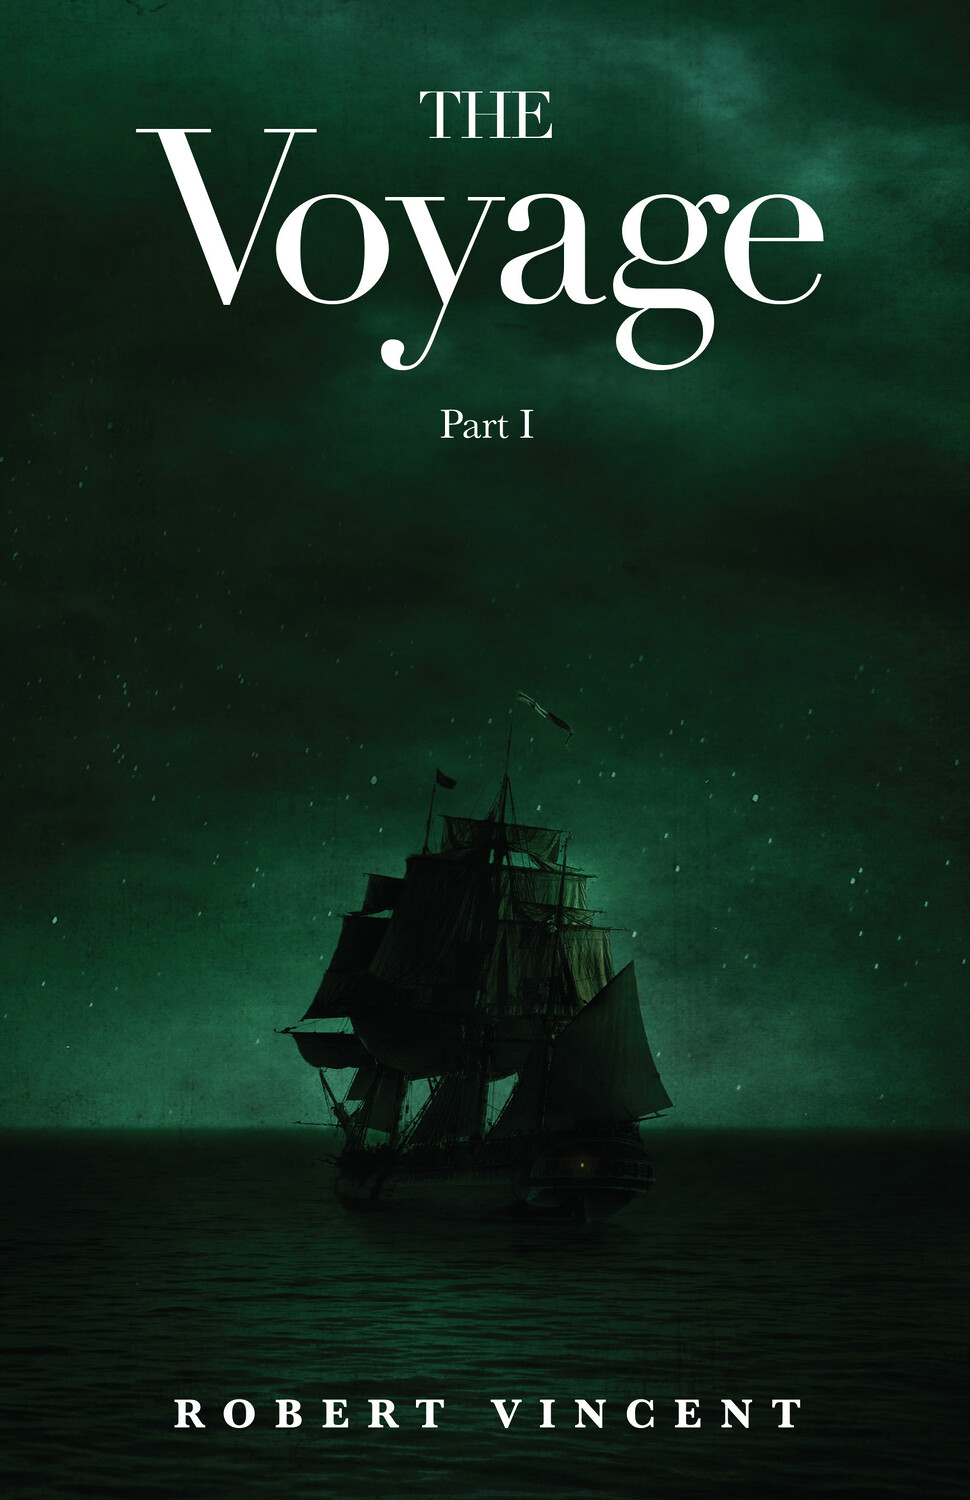 The Voyage: Part I, by Robert Vincent